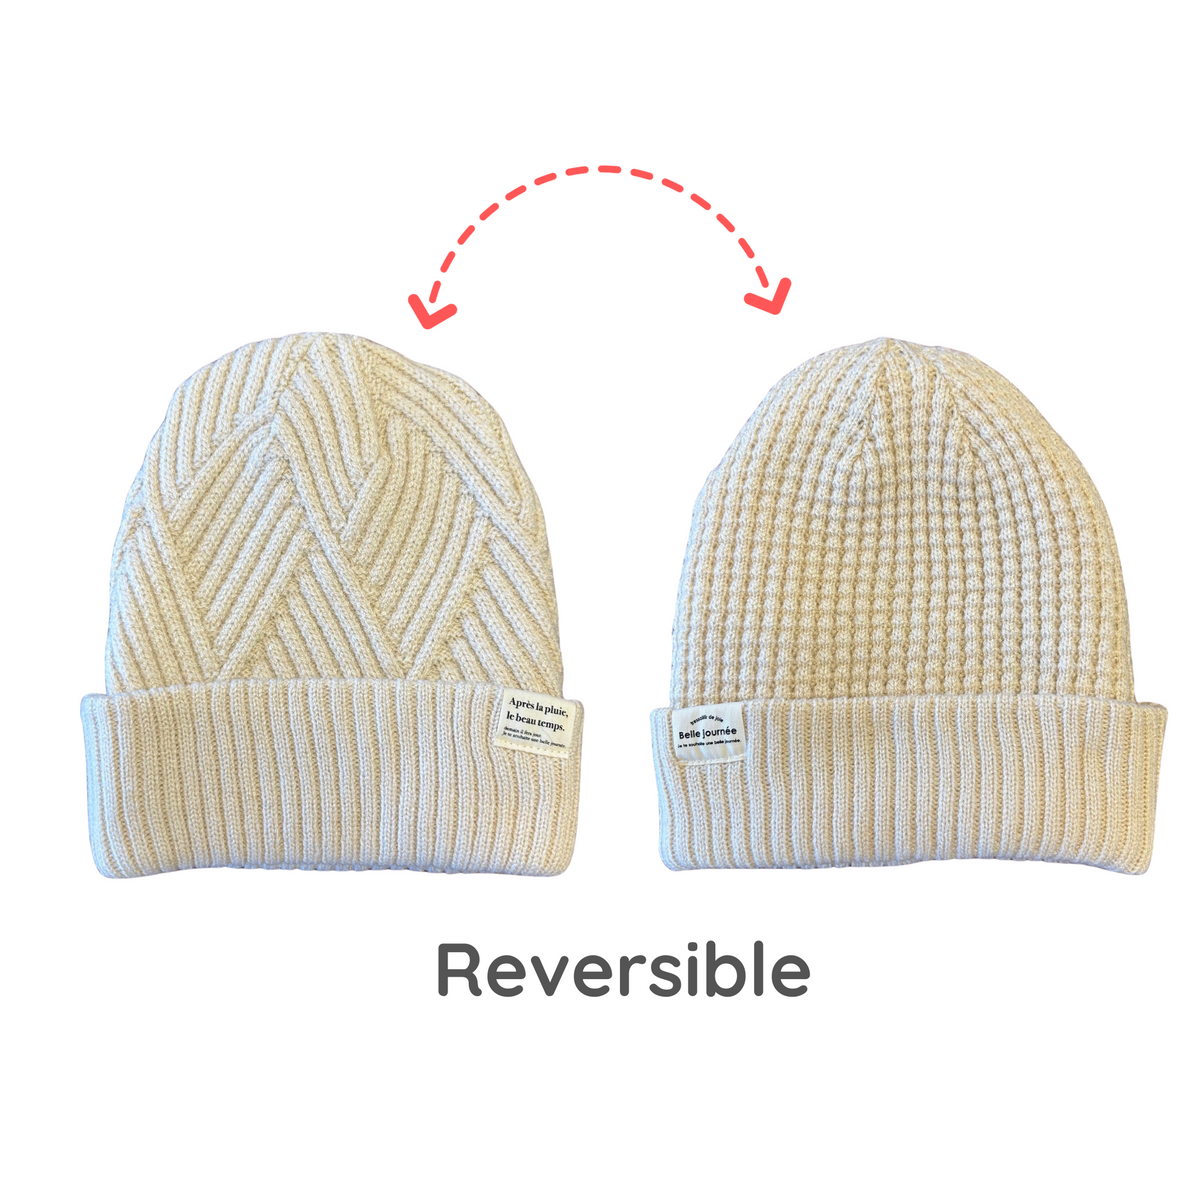 Recycled Fiber Design Knit 2-Way Reversible Beanie | Unisex | 7 Colors - CHERRYSTONEstyle